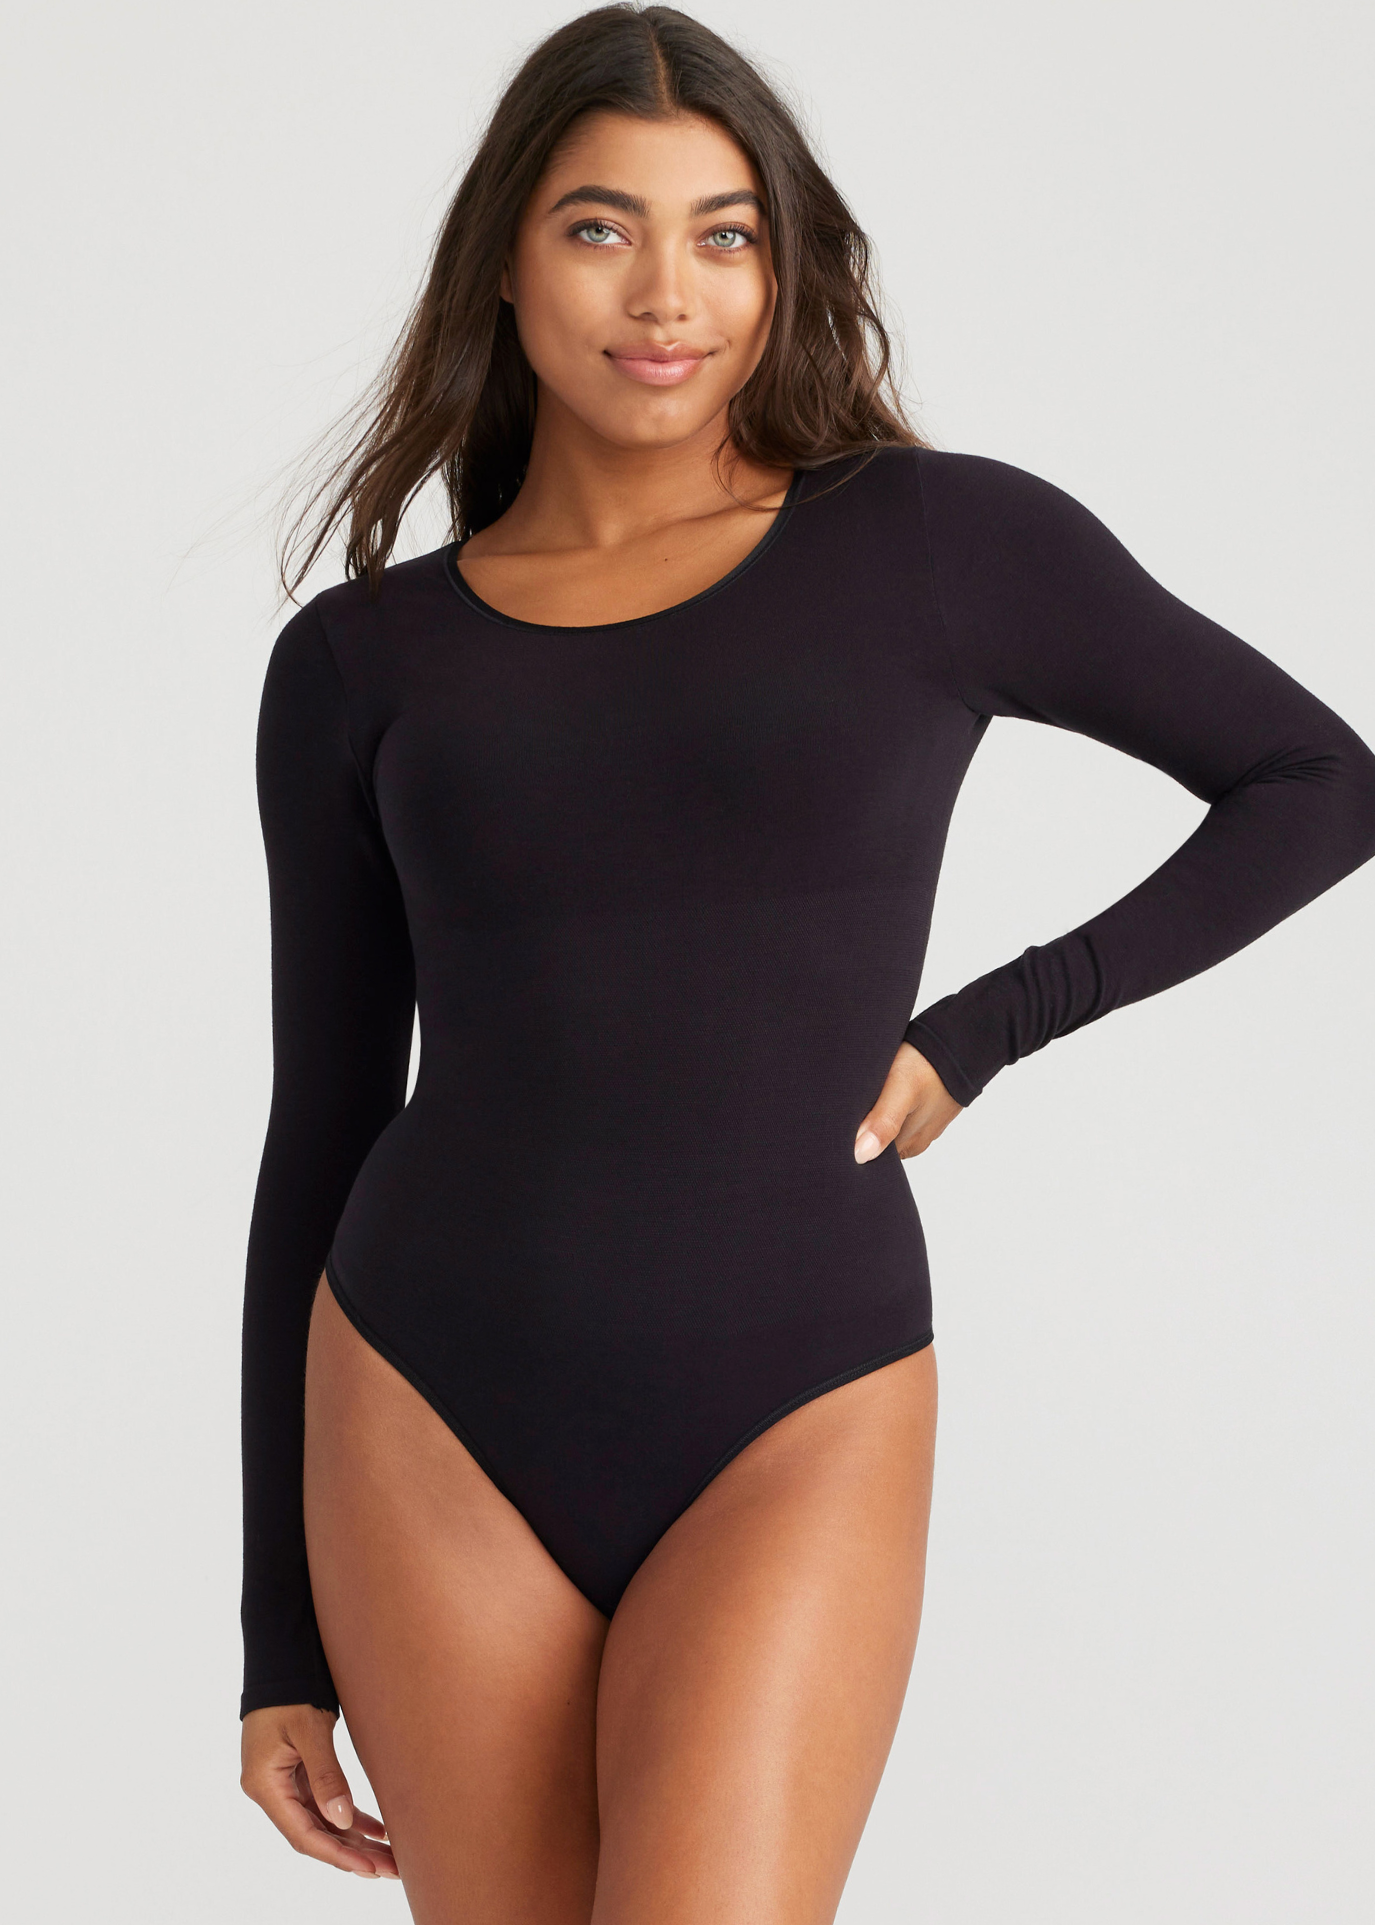 Not Rated Shaperx Women's Small Tummy Control Shapewear, Seamless Body  Shaper - $24 - From lilly